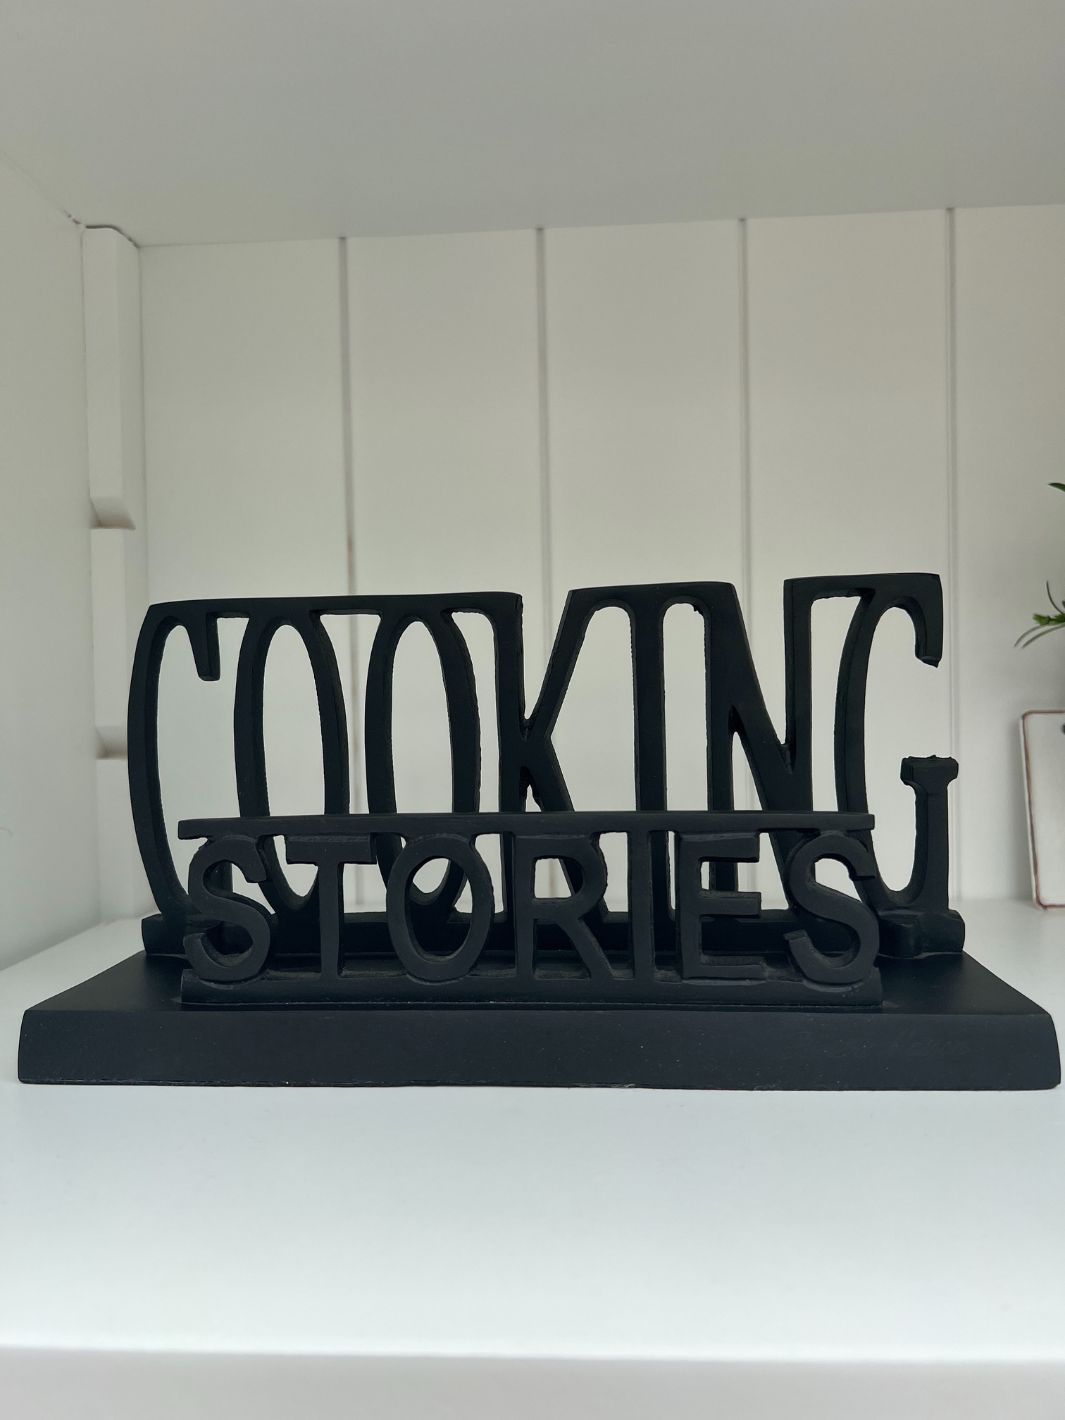 Cooking Stories Book Stand Riviera Maison